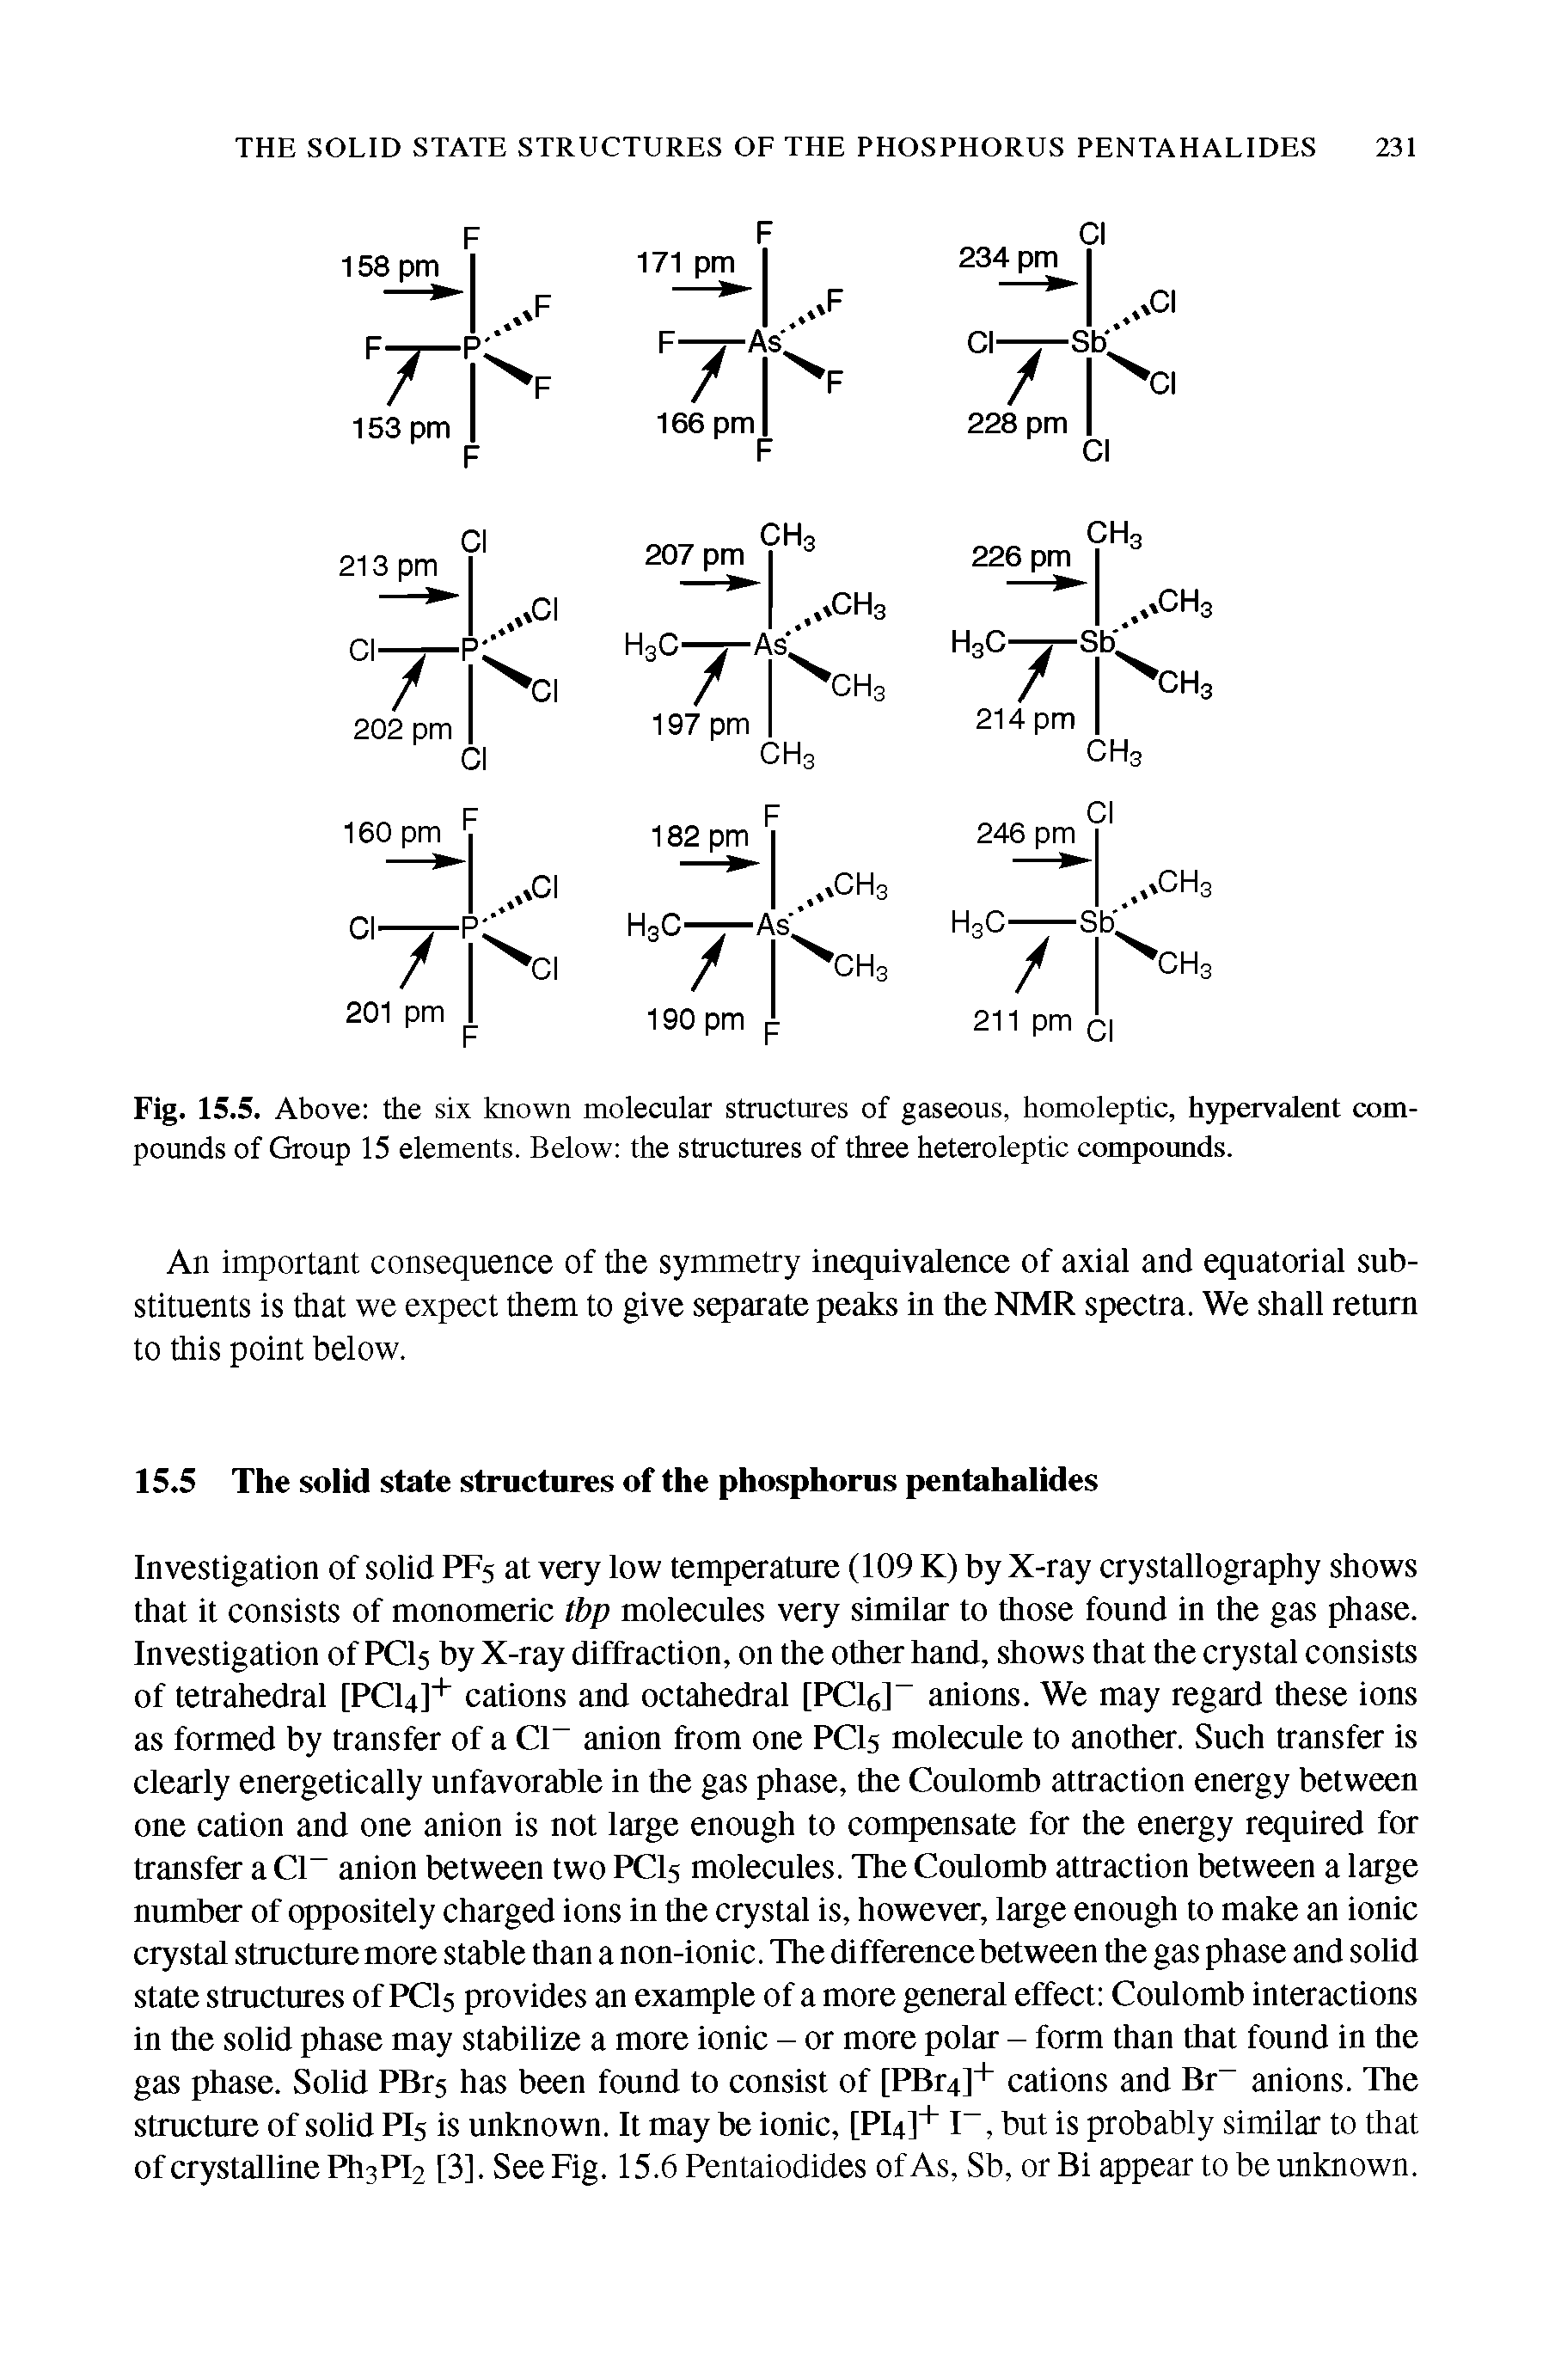 Fig. 15.5. Above the six known molecular structures of gaseous, homoleptic, hypervalent compounds of Group 15 elements. Below the structures of three heteroleptic compounds.